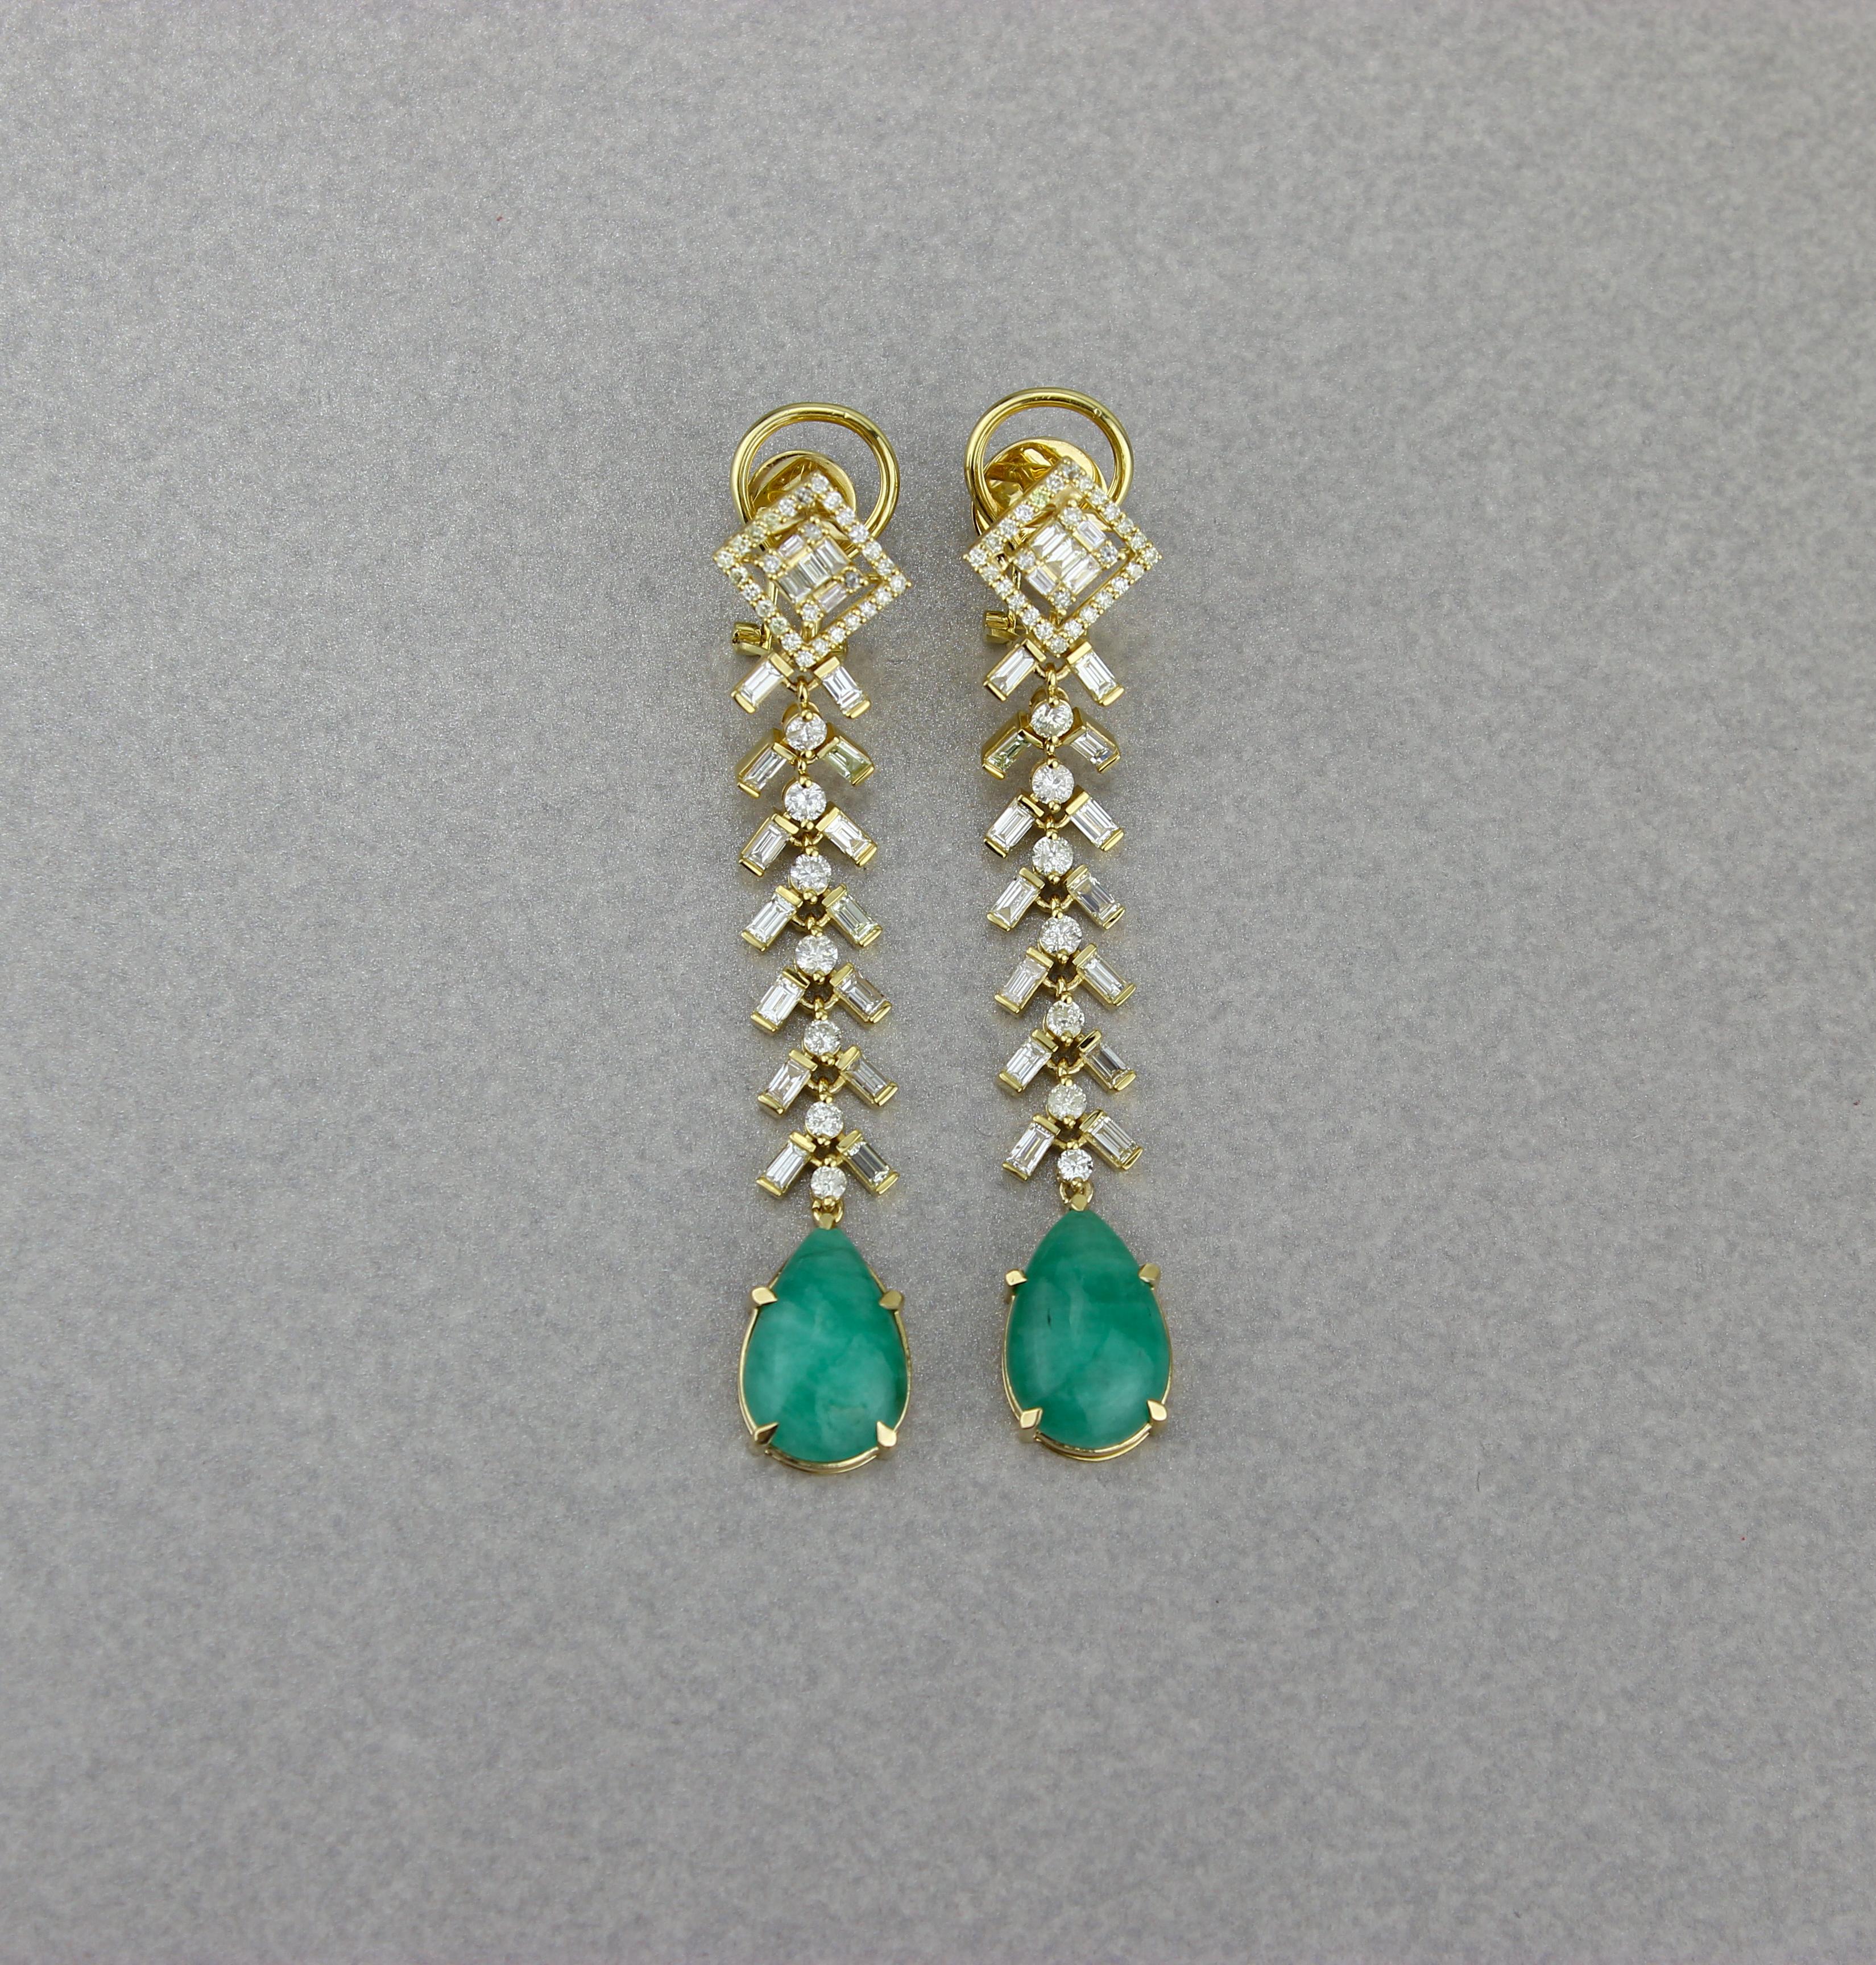 Tear Drop Emerald Gemstone and Diamond Earrings in 18k Solid Gold For Sale 3